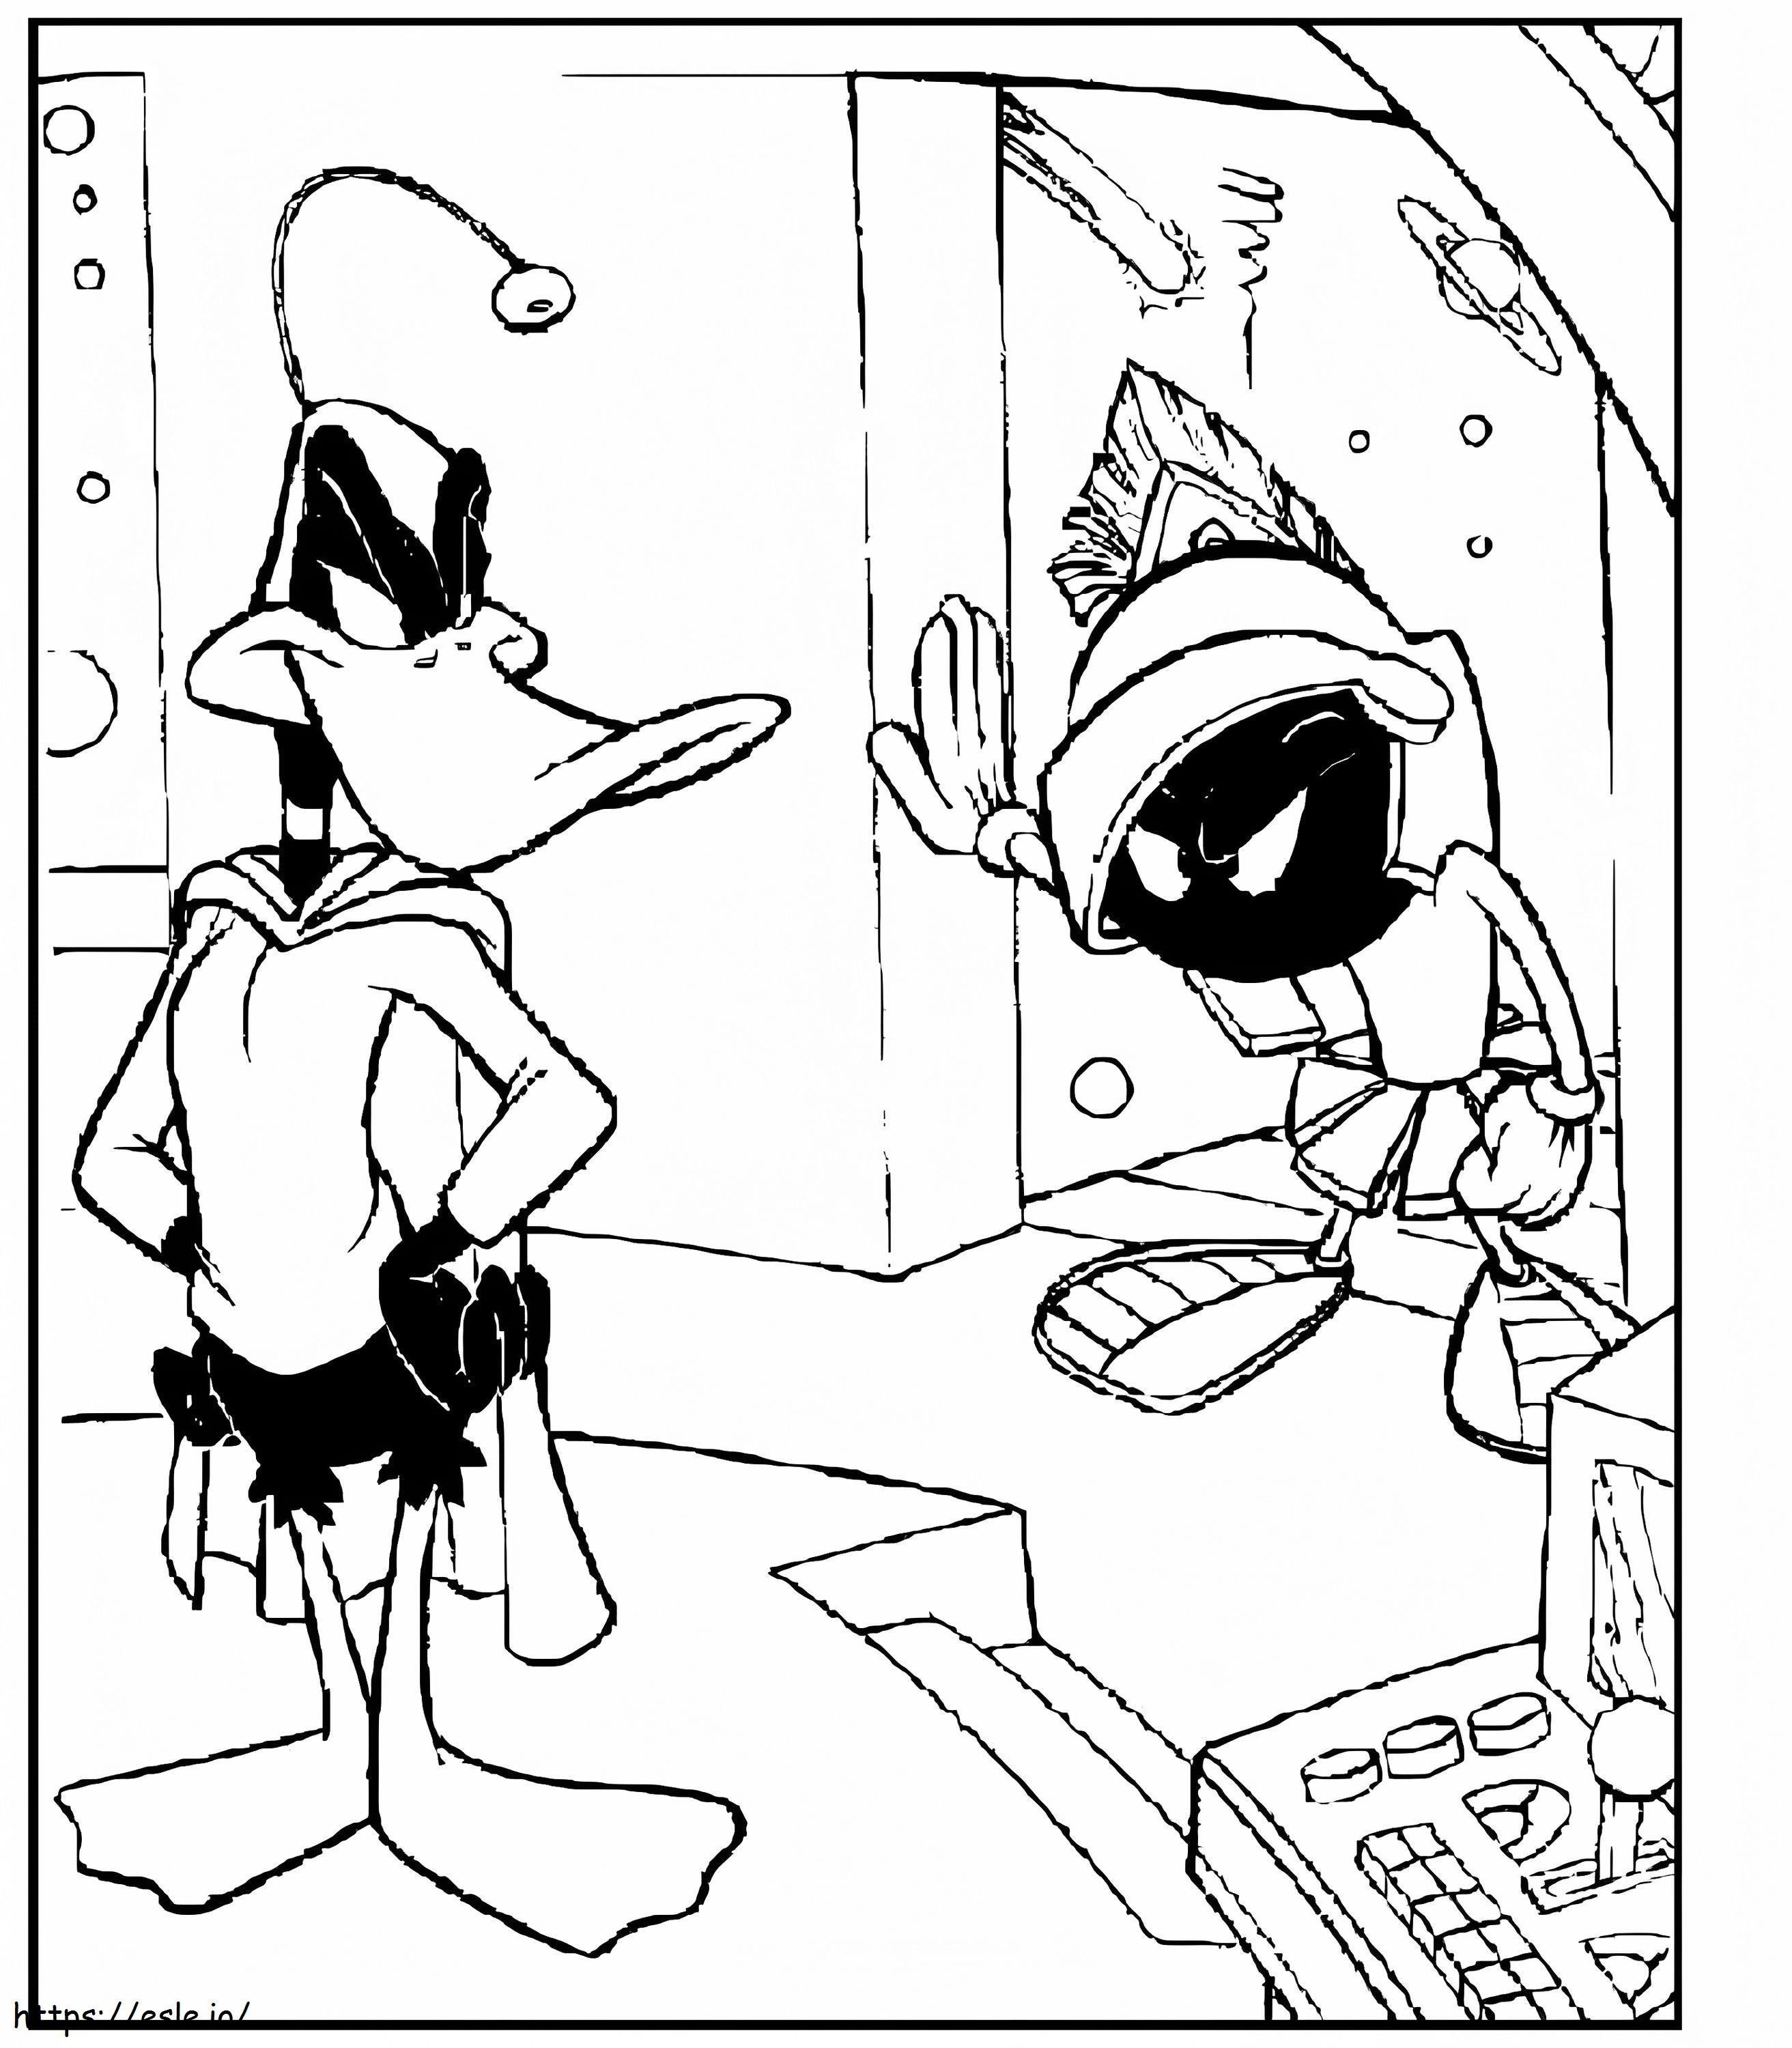 Marvin The Martian 12 coloring page